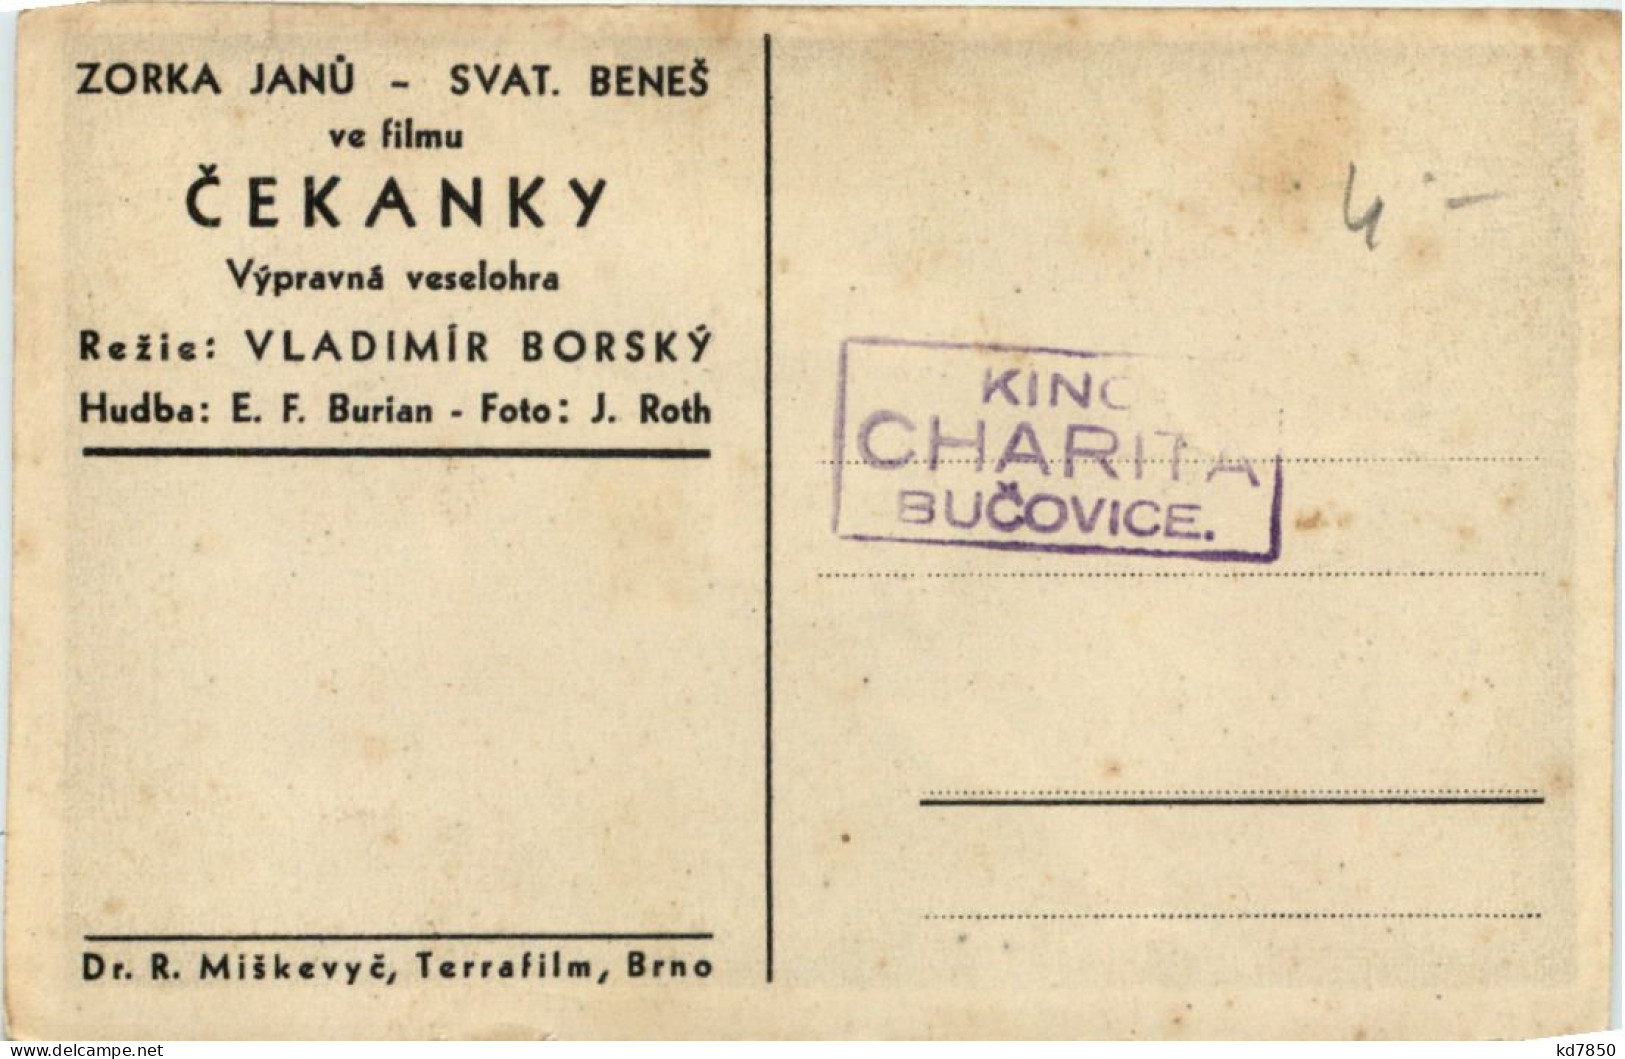 Film - Cekanky - Posters On Cards